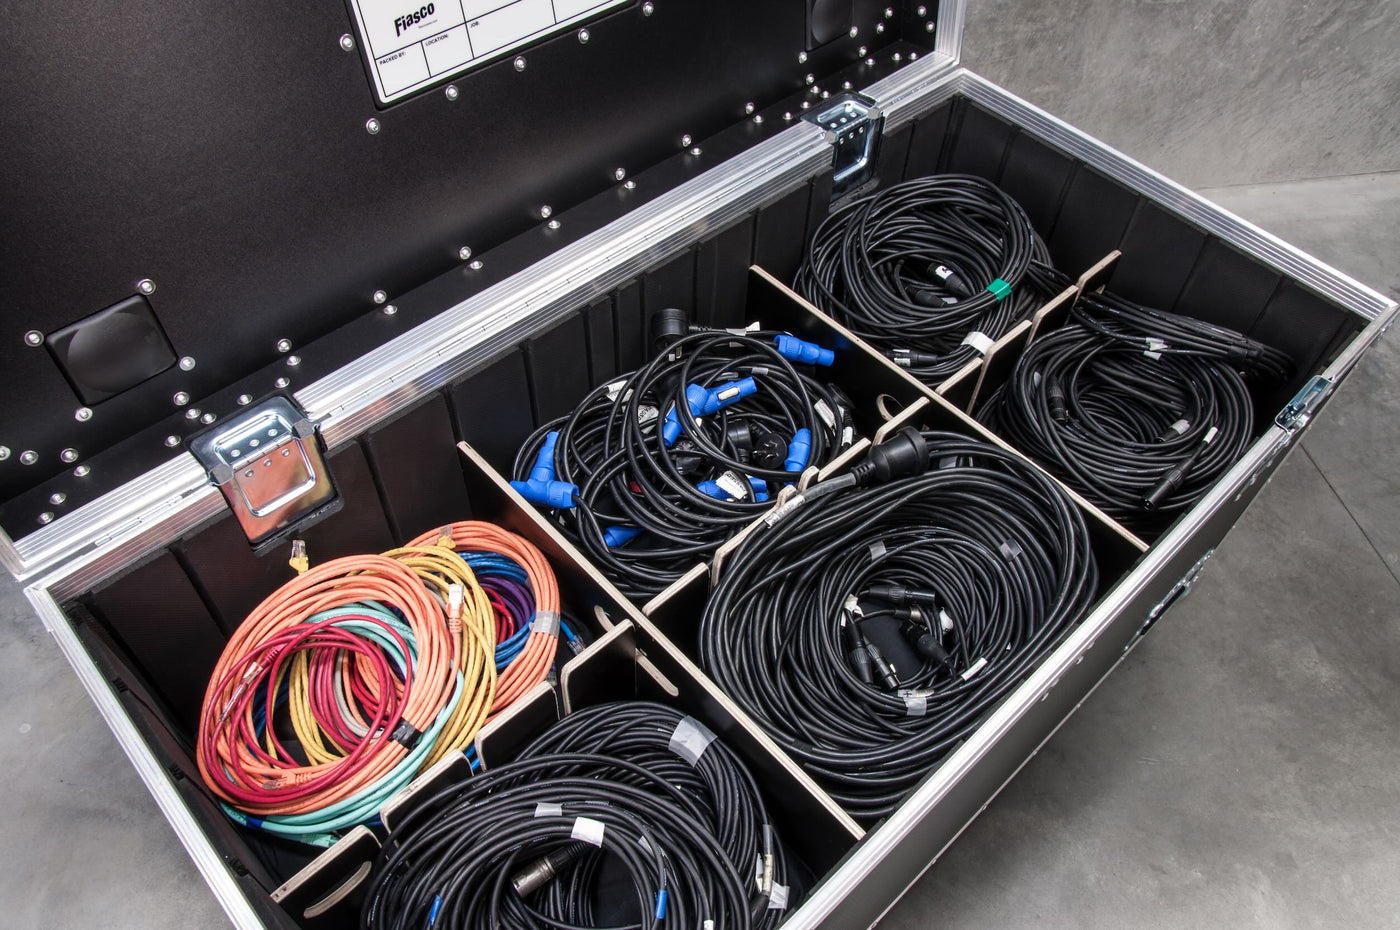 1200 road case with divider inserts for cable storage